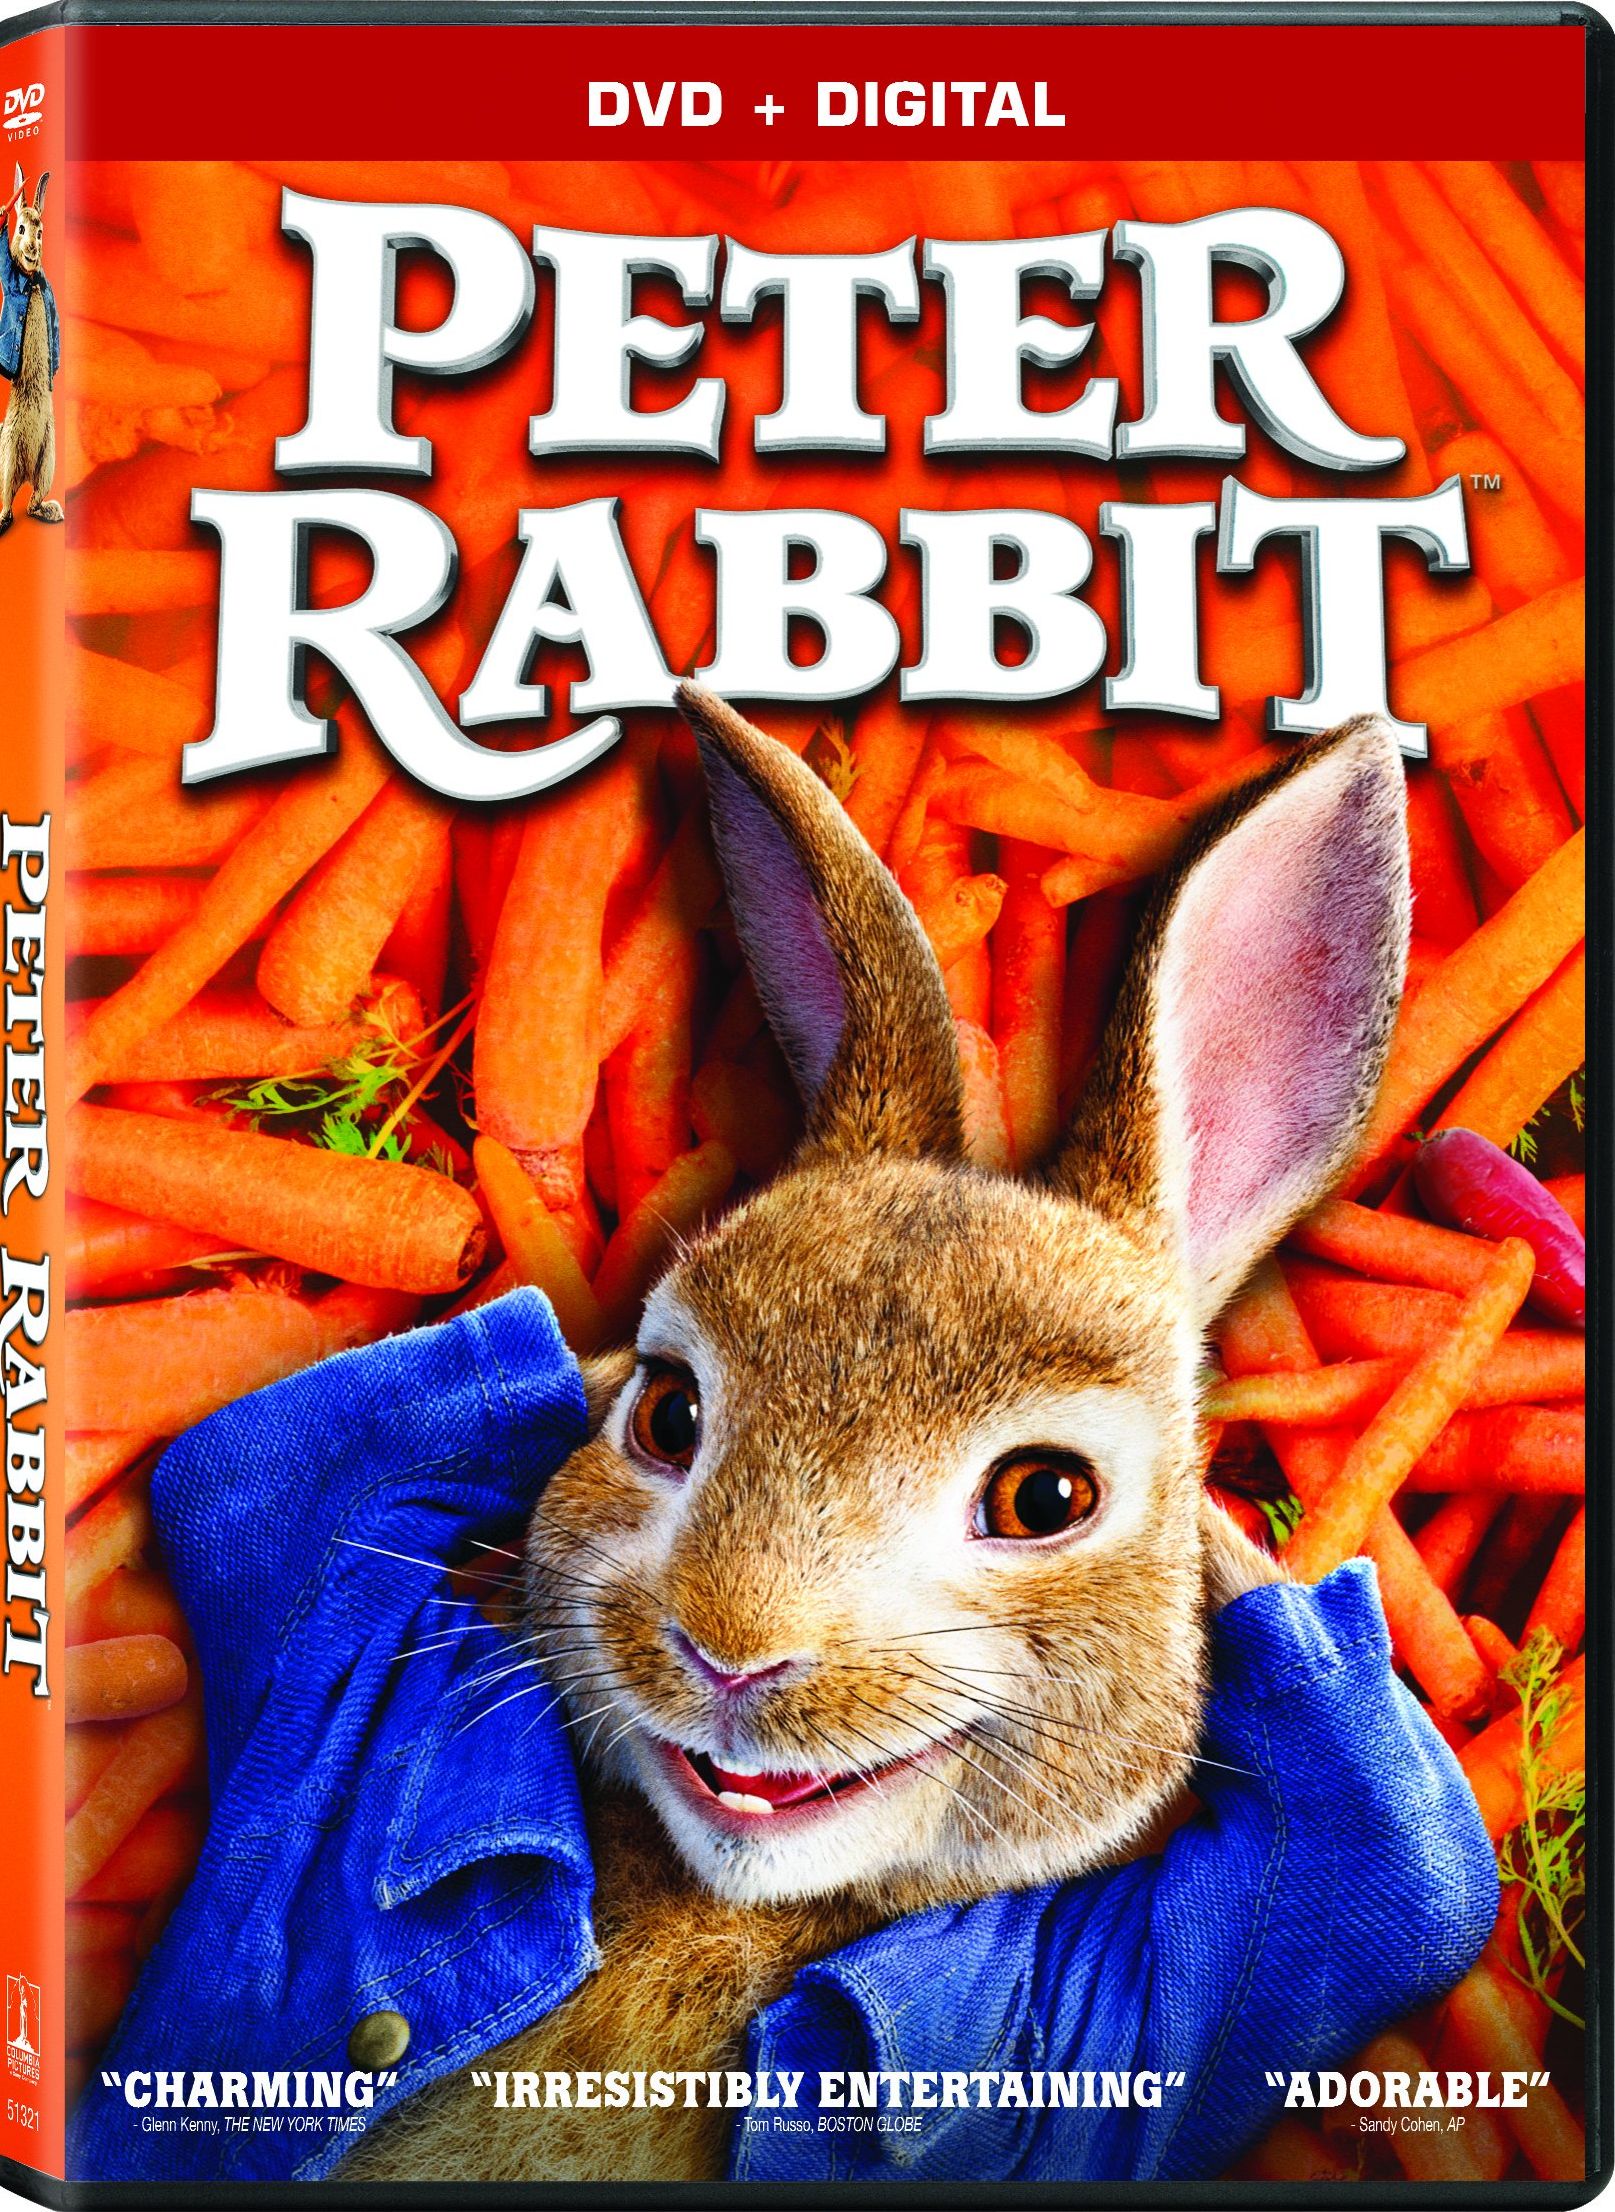 Peter Rabbit DVD Release Date May 1, 2018